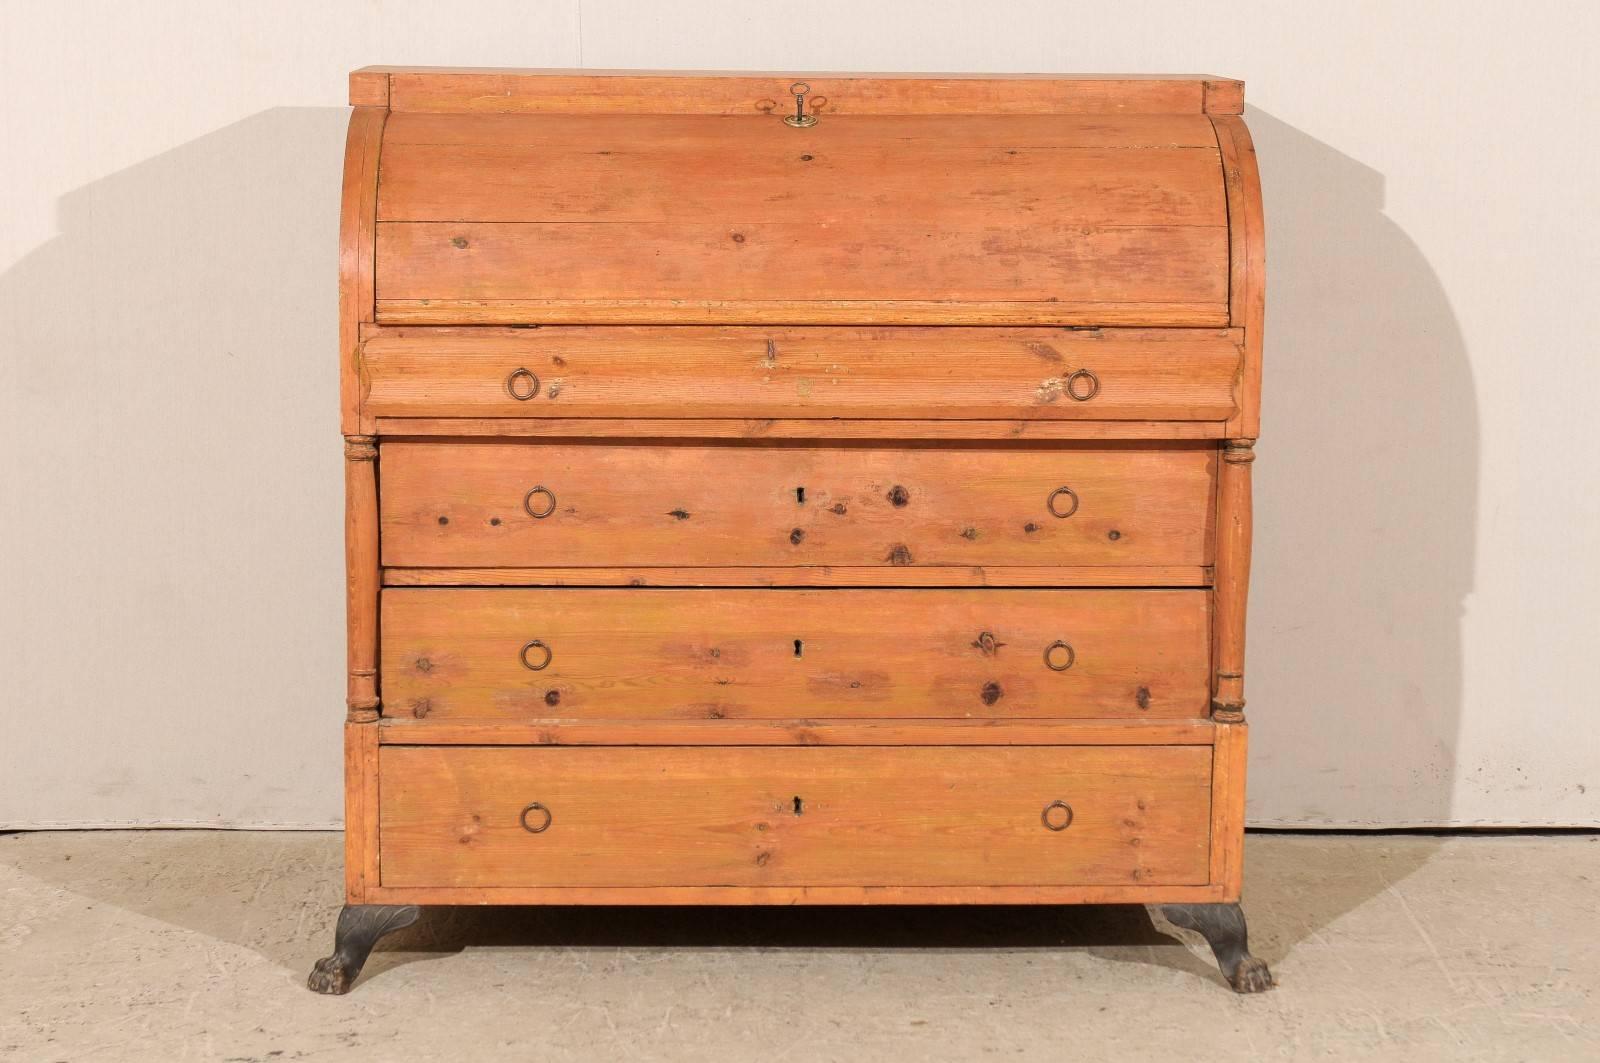 A Swedish mid-19th century chest. This Swedish chest features a convex-front opening in the top portion. When open, note that this upper portion remains curved and is hooked to two chains (not photographed here). Within the top portion are multiple